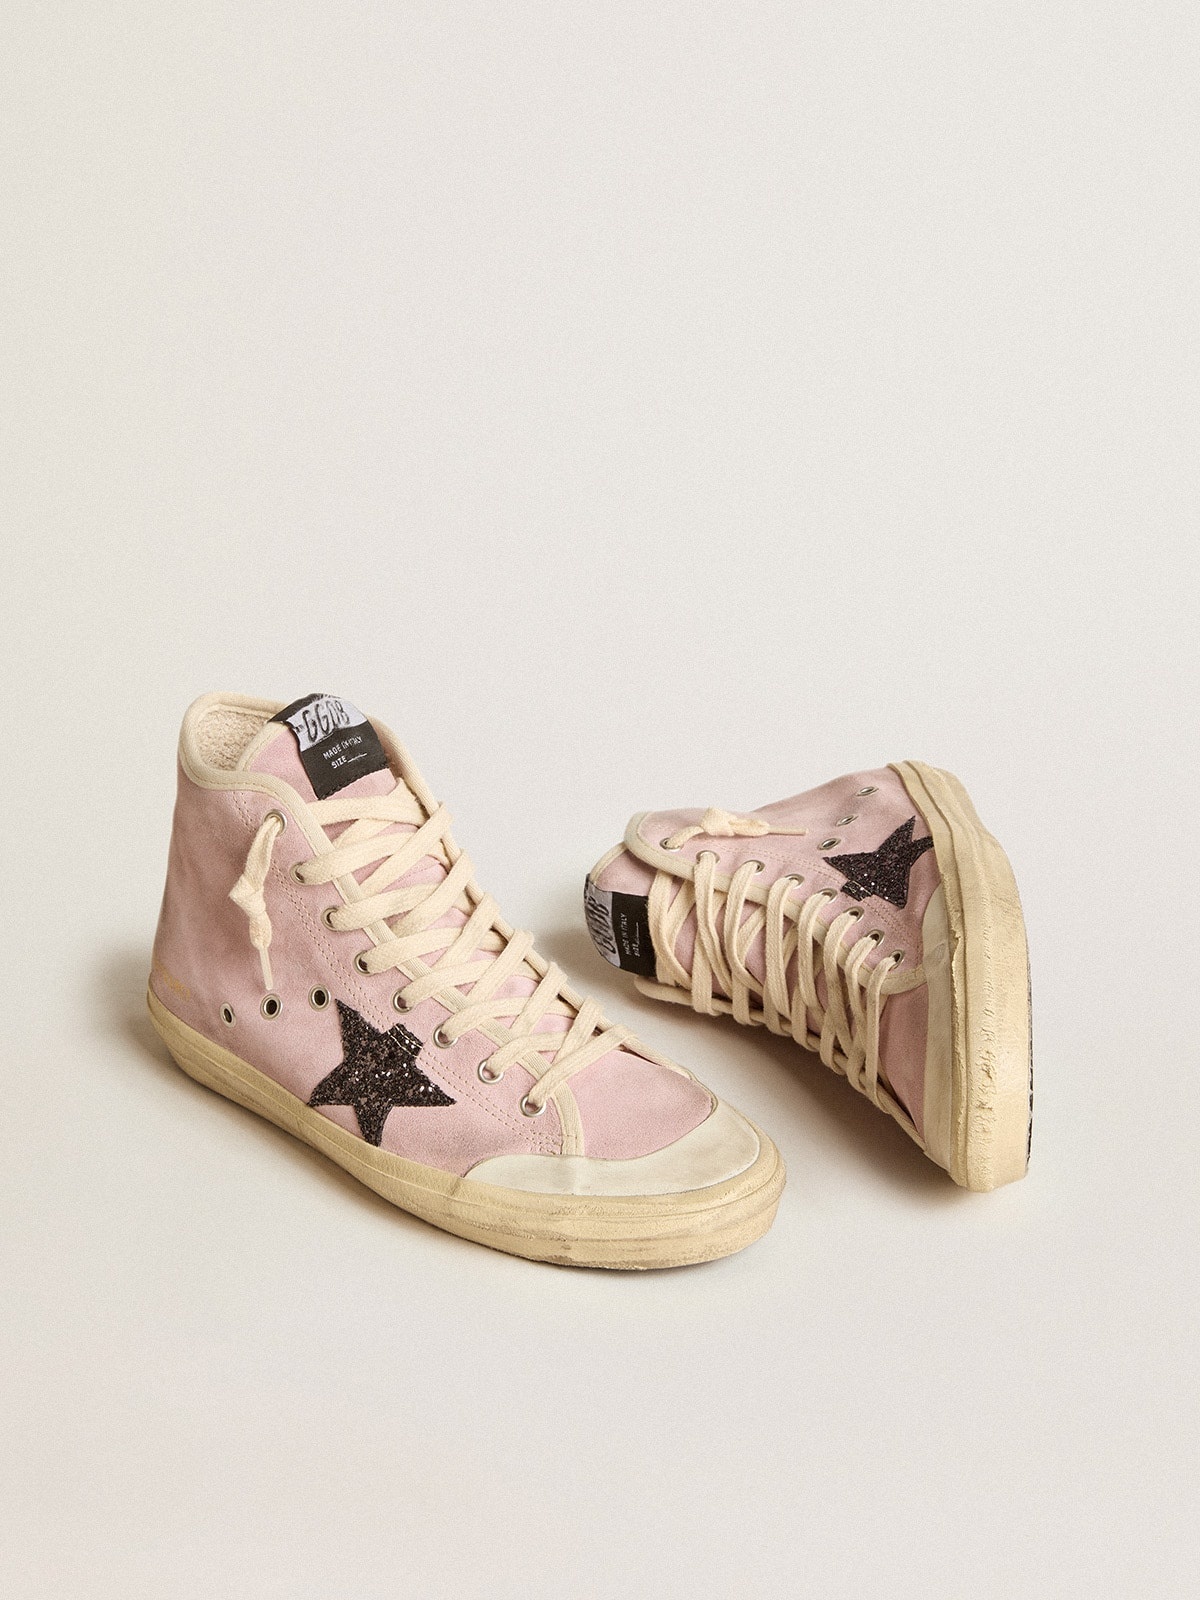 Francy Penstar in pink suede with gray glitter star - 2